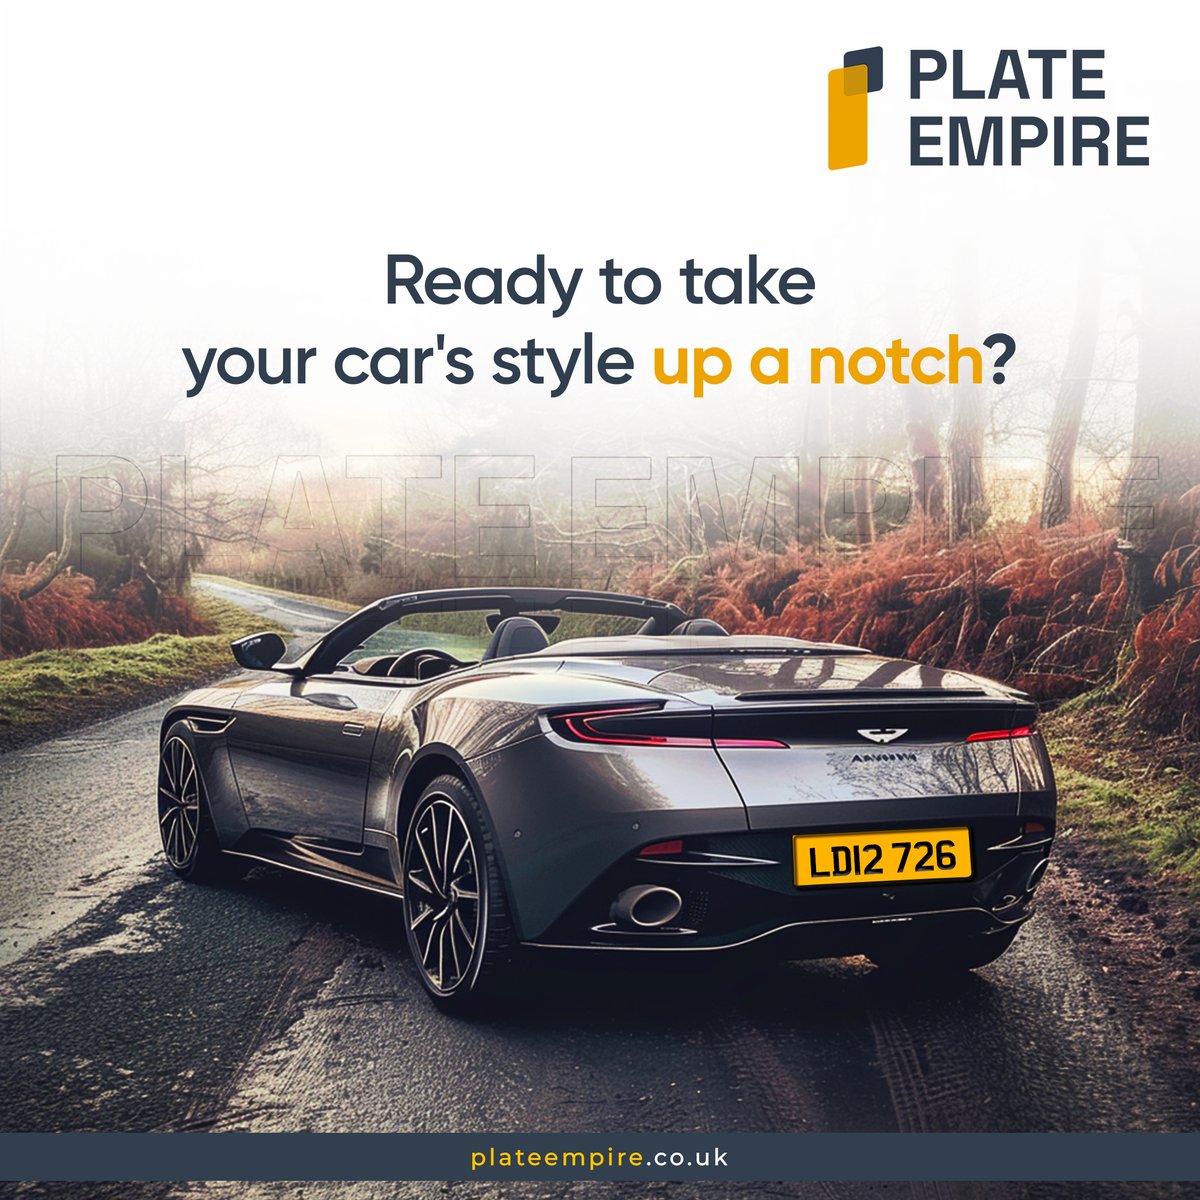 Why settle for boring plates when you can ride with personality? Crafted with care and creativity, they're more than just accessories.

#plateempire #carstyle #customplates #rideinstyle #uniqueplates #personalizedplates #ukplates #ukplateshop #platesuk #carshow #carstagram